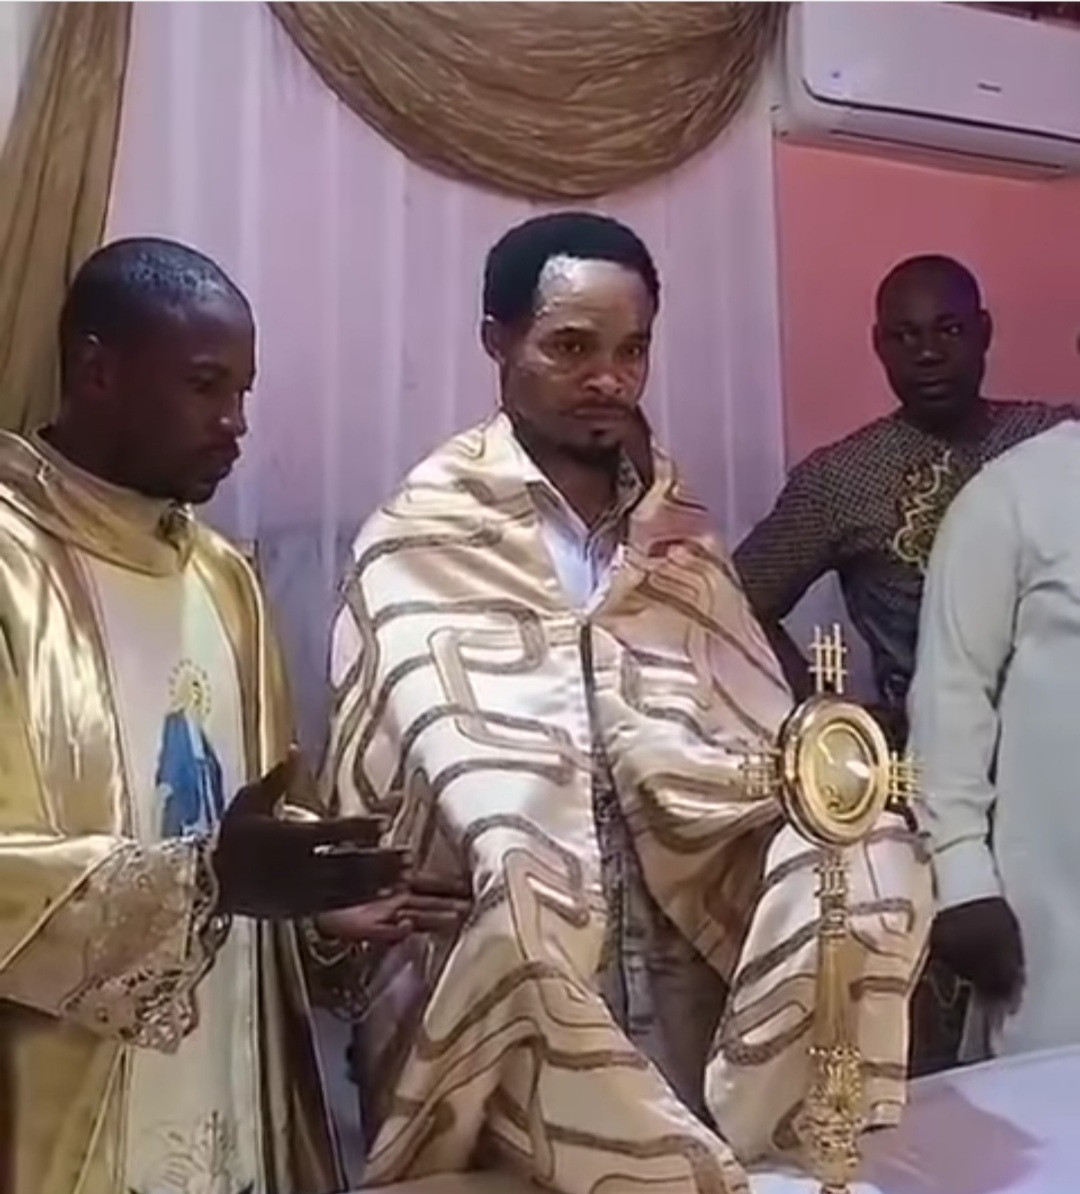 Outrage as Odumejeje is seen lifting the Catholic "blessed sacrament" after man dressed like a Catholic priest blessed it (video)